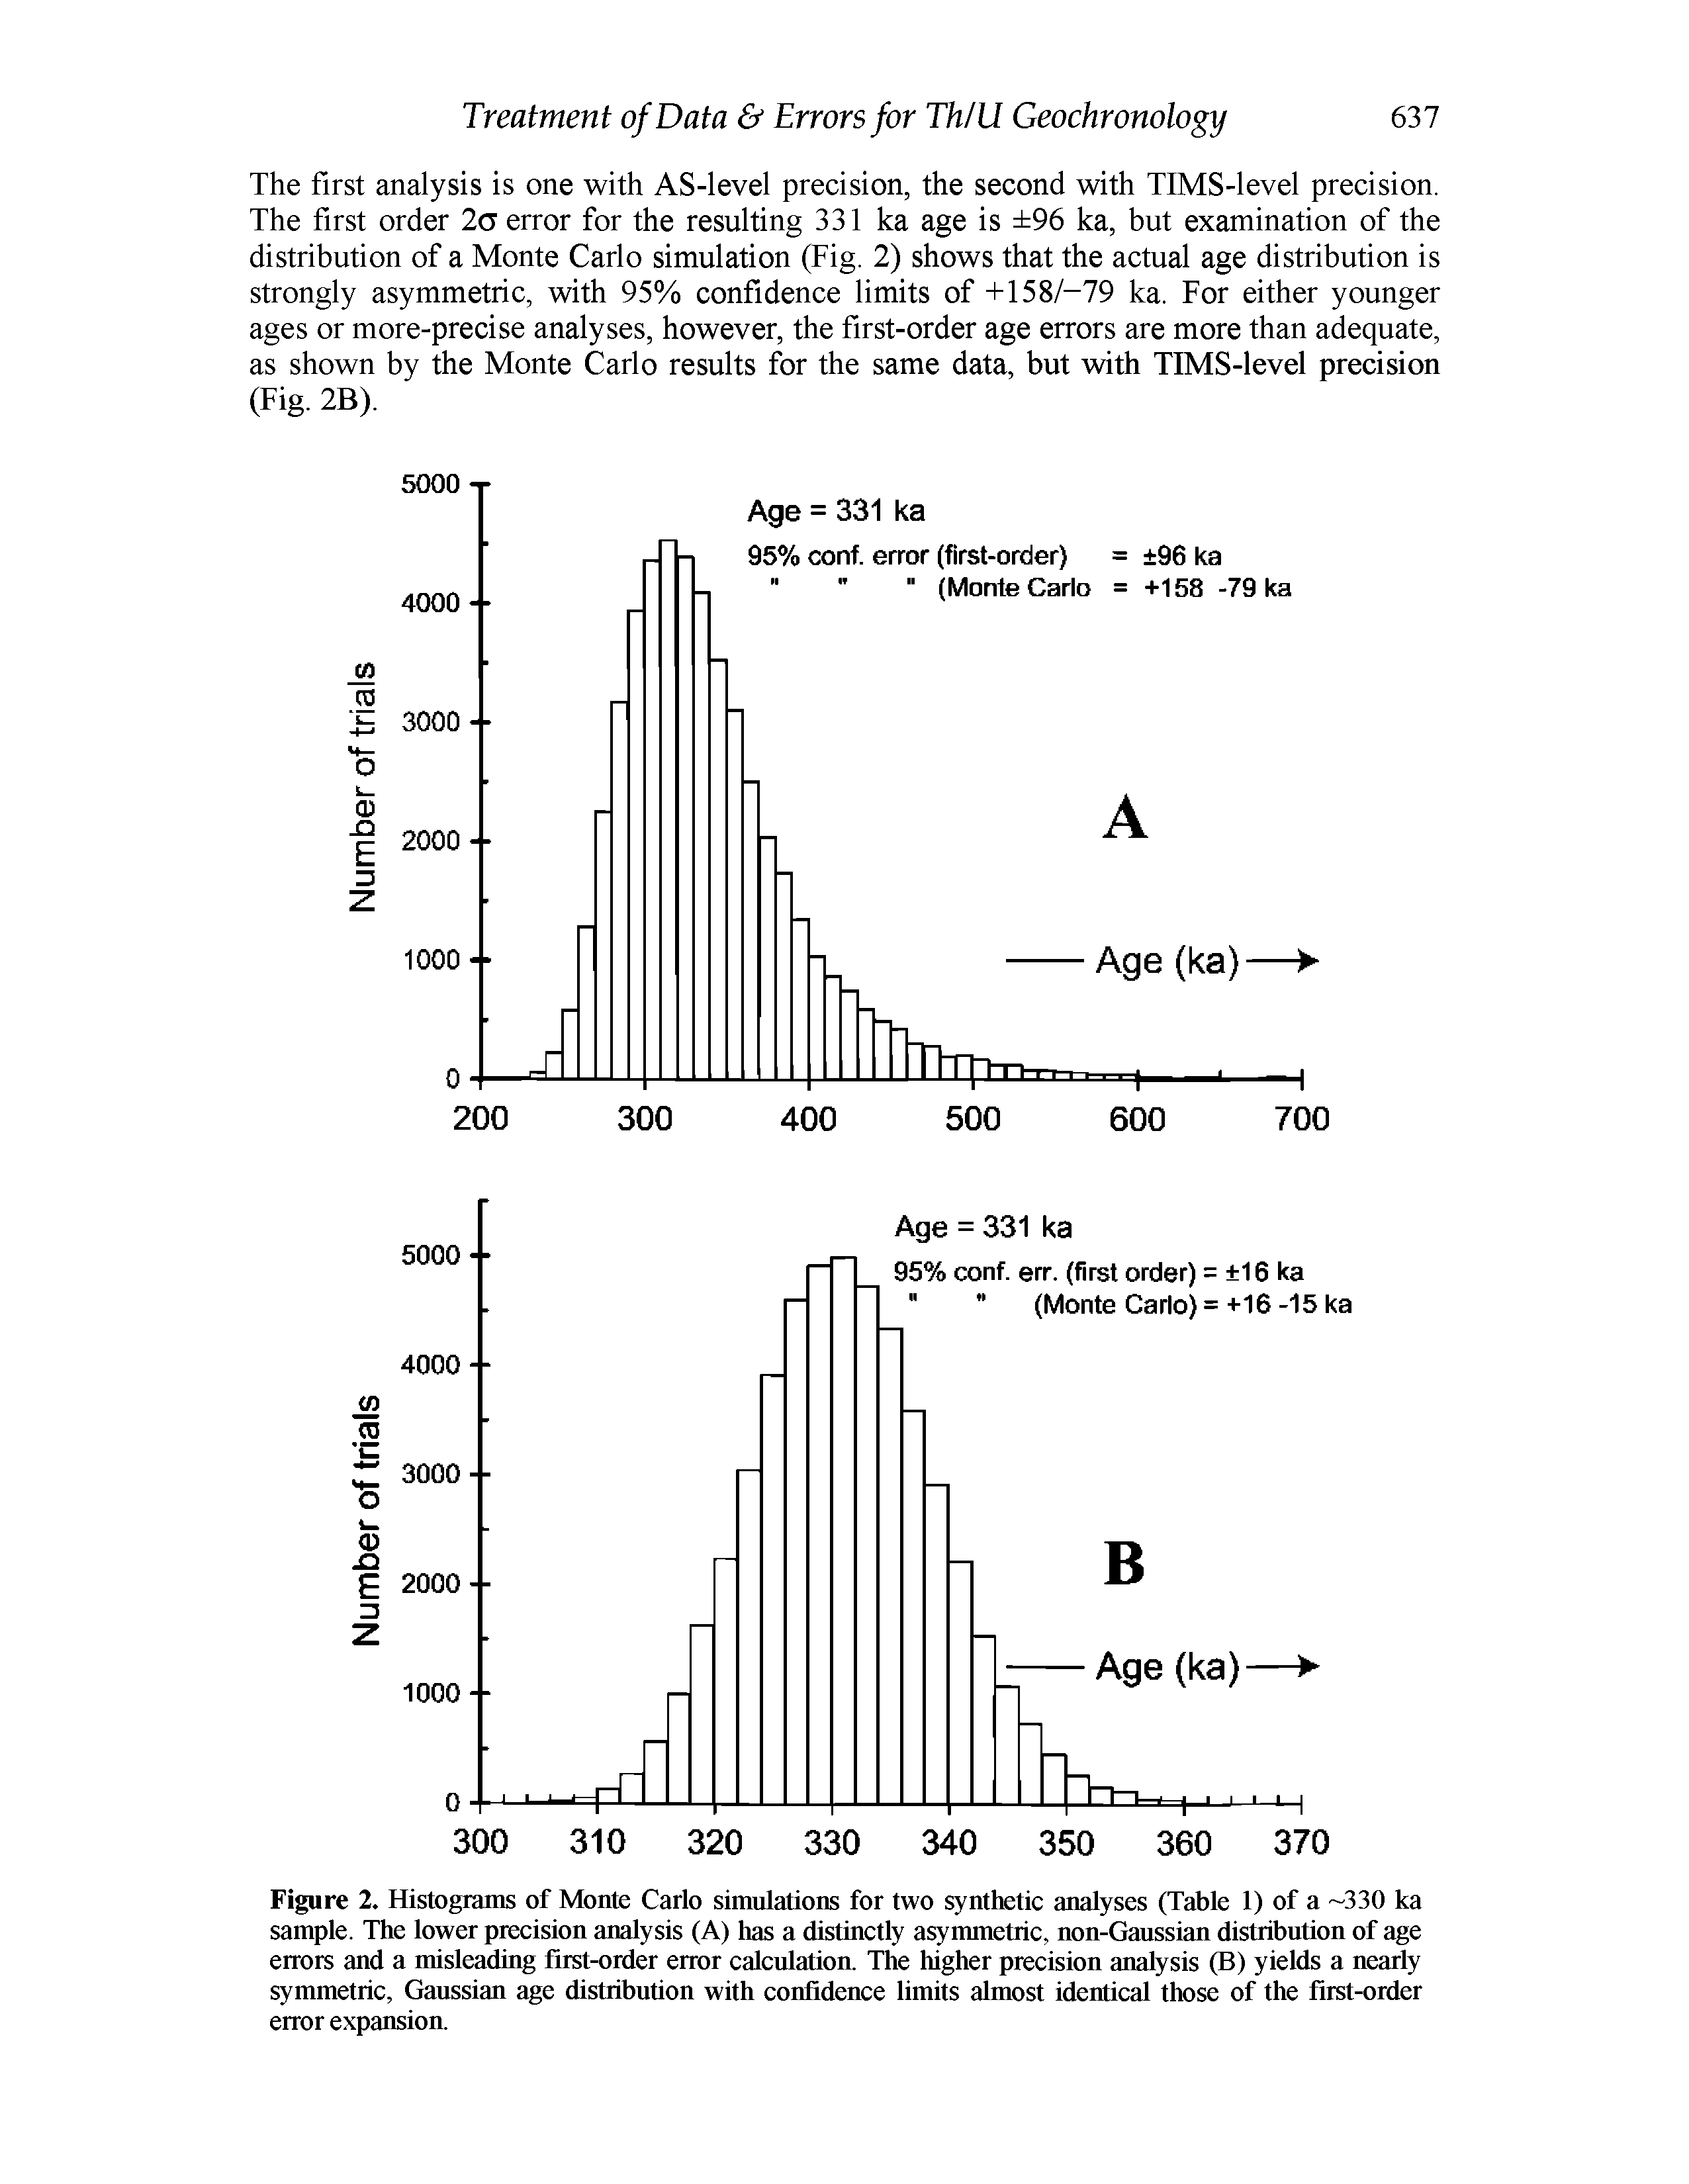 Figure 2. Histograms of Monte Carlo simulations for two synthetic analyses (Table 1) of a 330 ka sample. The lower precision analysis (A) has a distinctly asymmetric, non-Gaussian distribution of age errors and a misleading first-order error calculation. The higher precision analysis (B) yields a nearly symmetric, Gaussian age distribution with confidence limits almost identical those of the first-order error expansion.